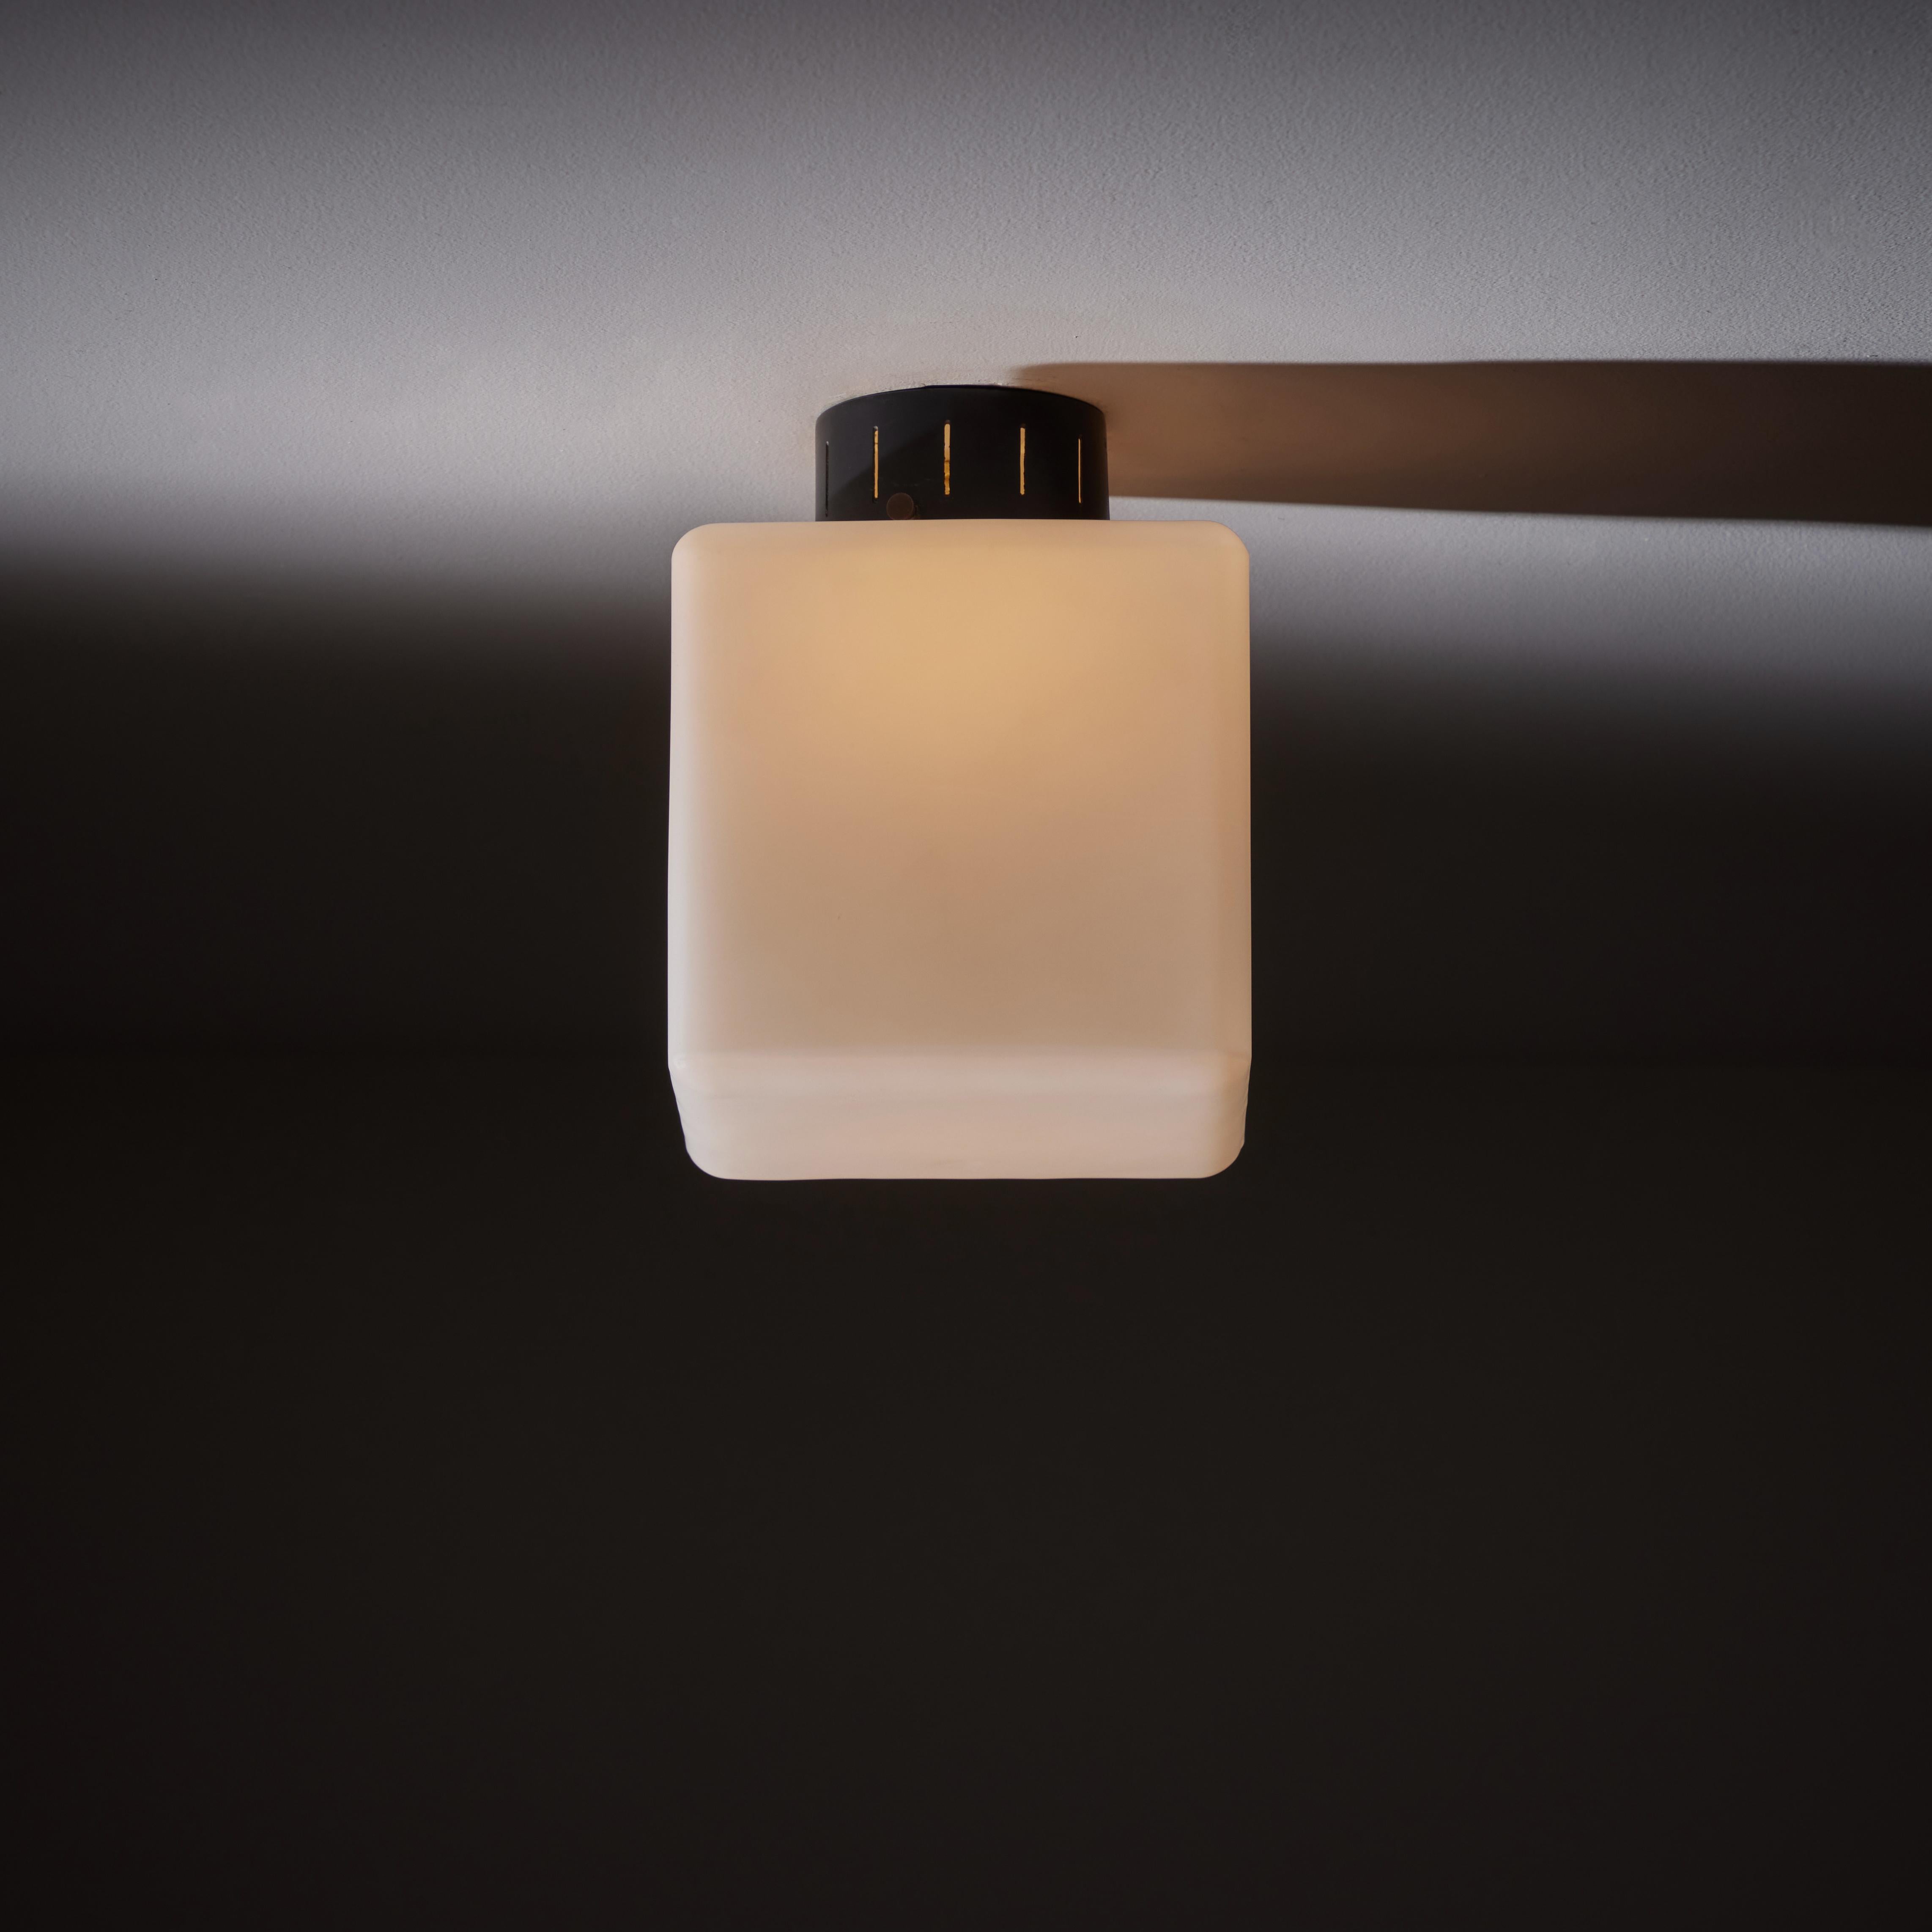 Flush mount ceiling lights by Stilnovo. Designed and manufactured in Italy, circa the 1960s. Simple, cubic milk glass shades offering ambient light diffusion; mounted to the ceiling with a black enameled canopy. We recommend one E27 40w maximum bulb